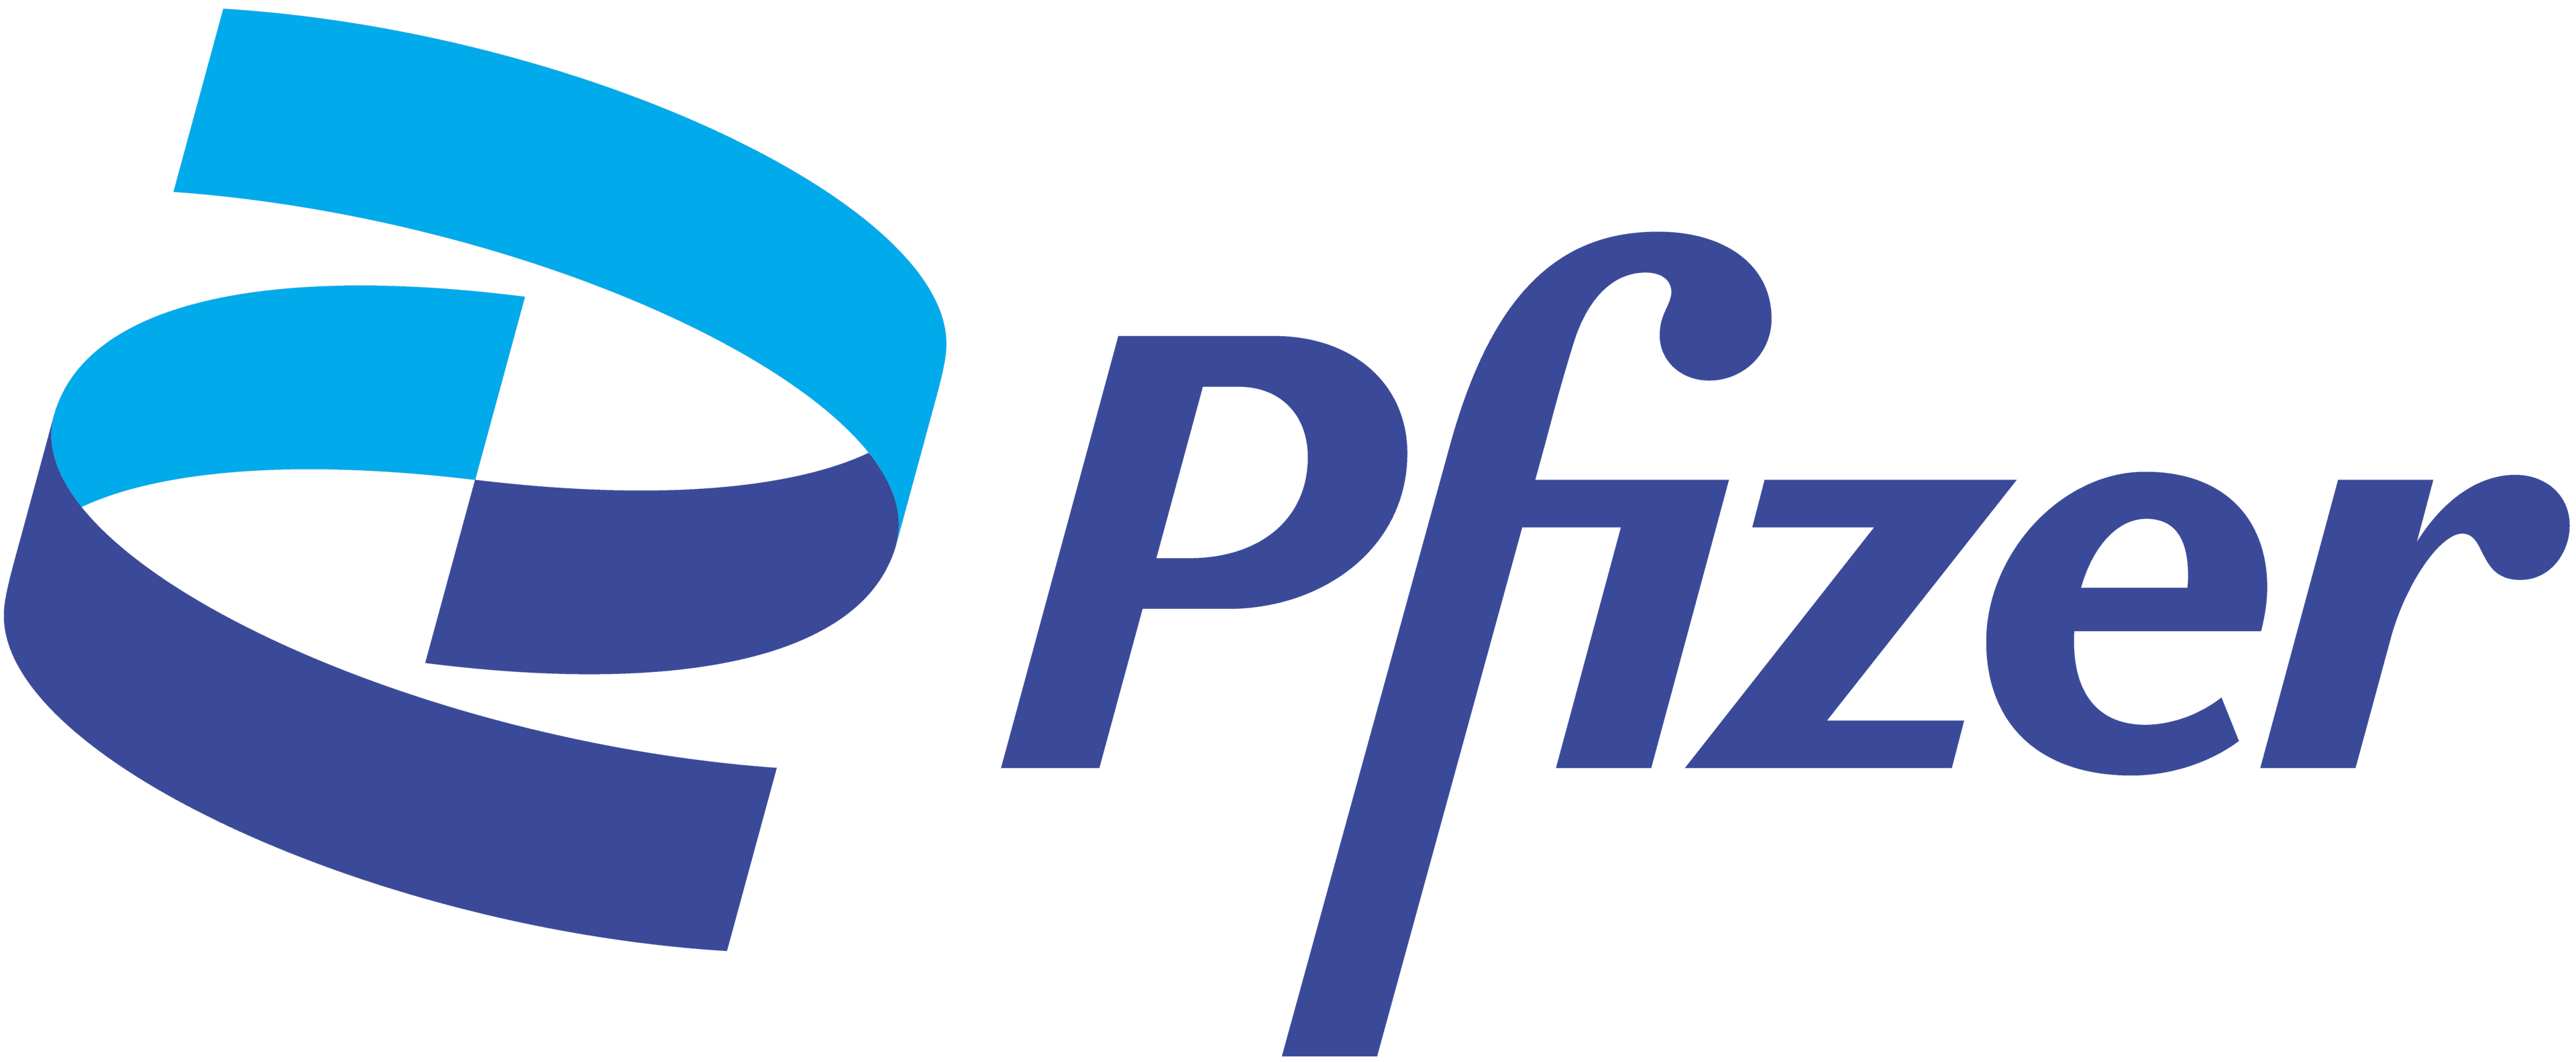 Pfizer Starts Phase 3 Trial for RSV Vaccine